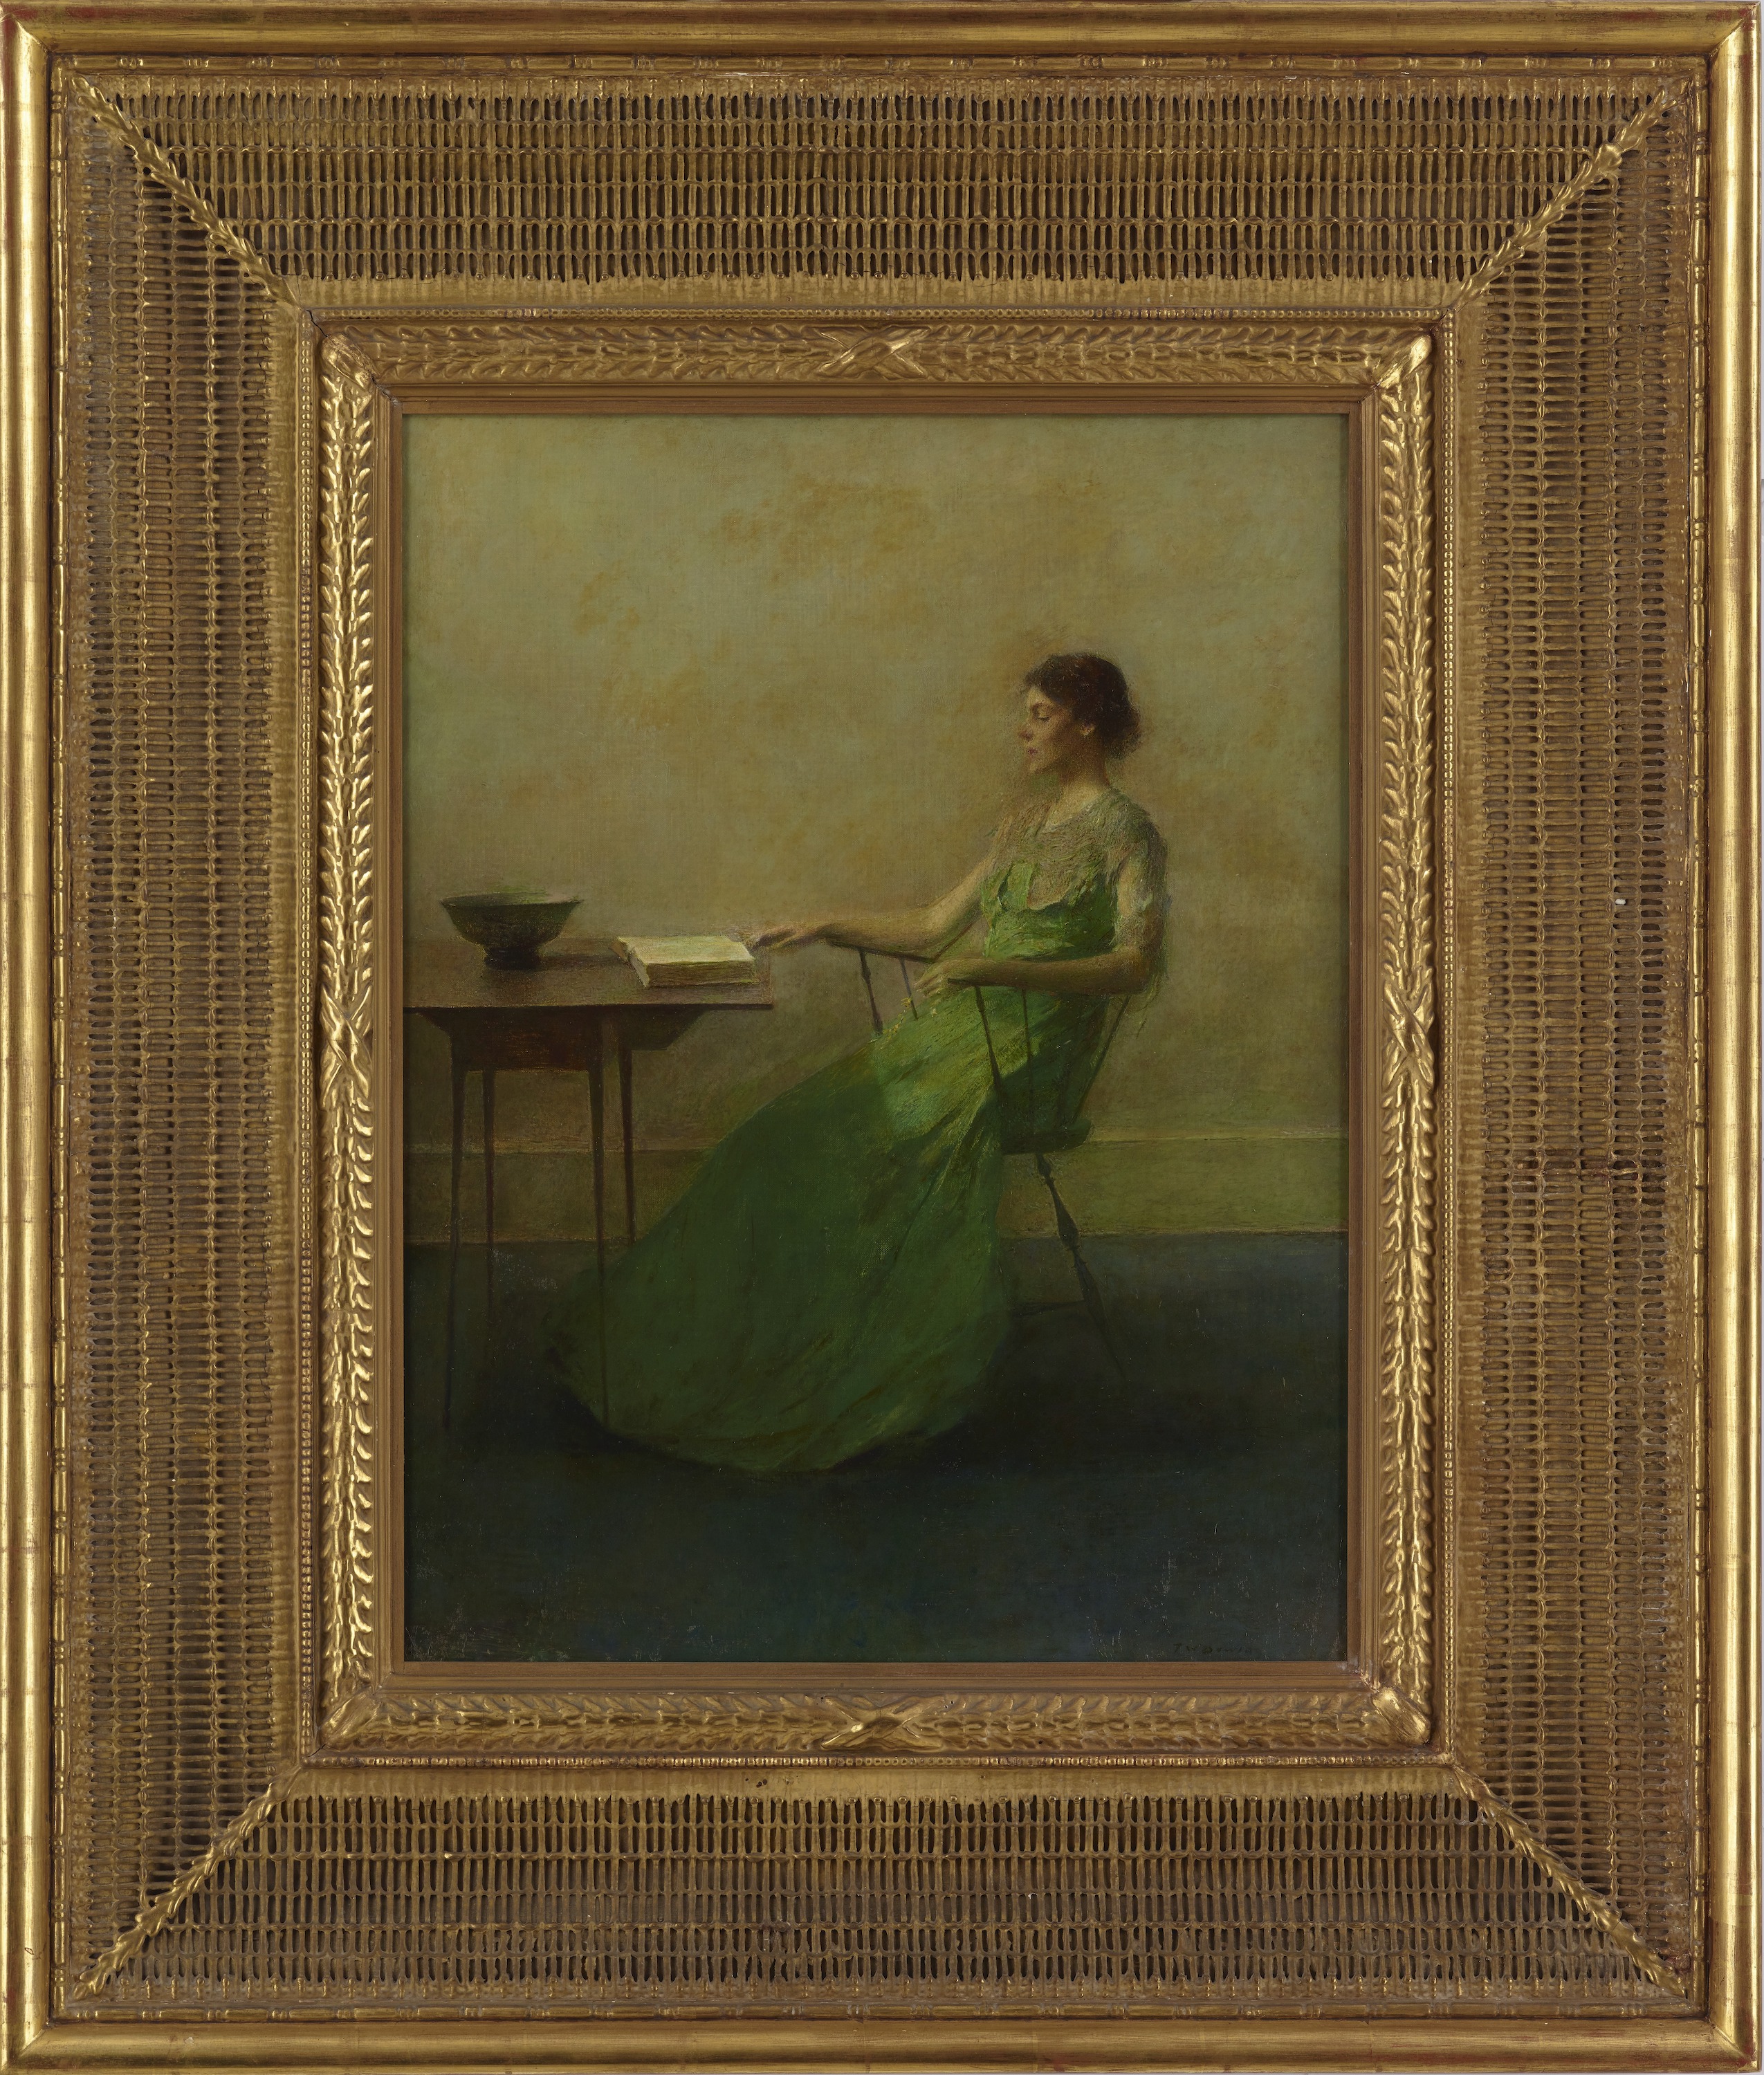 The Garland by Thomas Wilmer Dewing - ca. 1916 - 63.7 x 48.4 cm National Museum of Asian Art